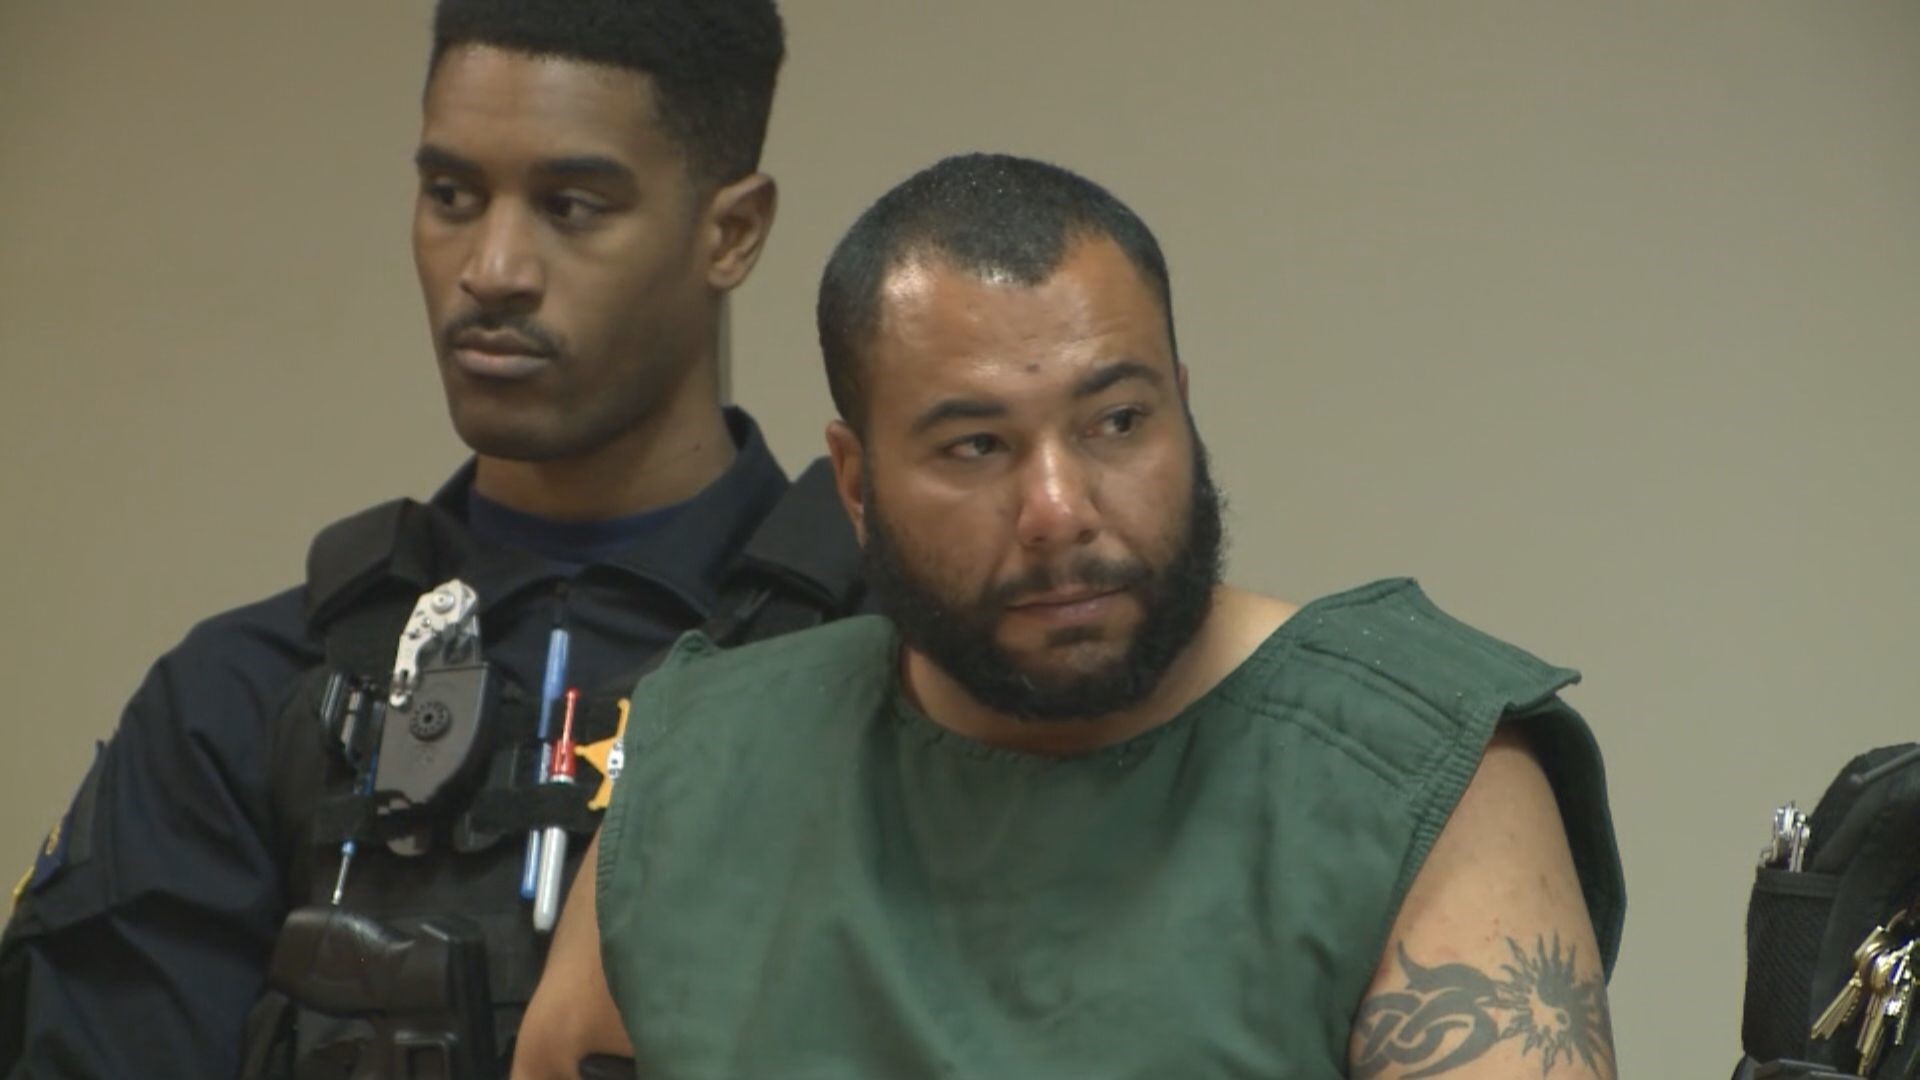 The man accused of shooting and killing a former National Guard member in broad daylight on a Buford, Ga. street had a testy first court appearance on Wednesday. WARNING: contains adult language